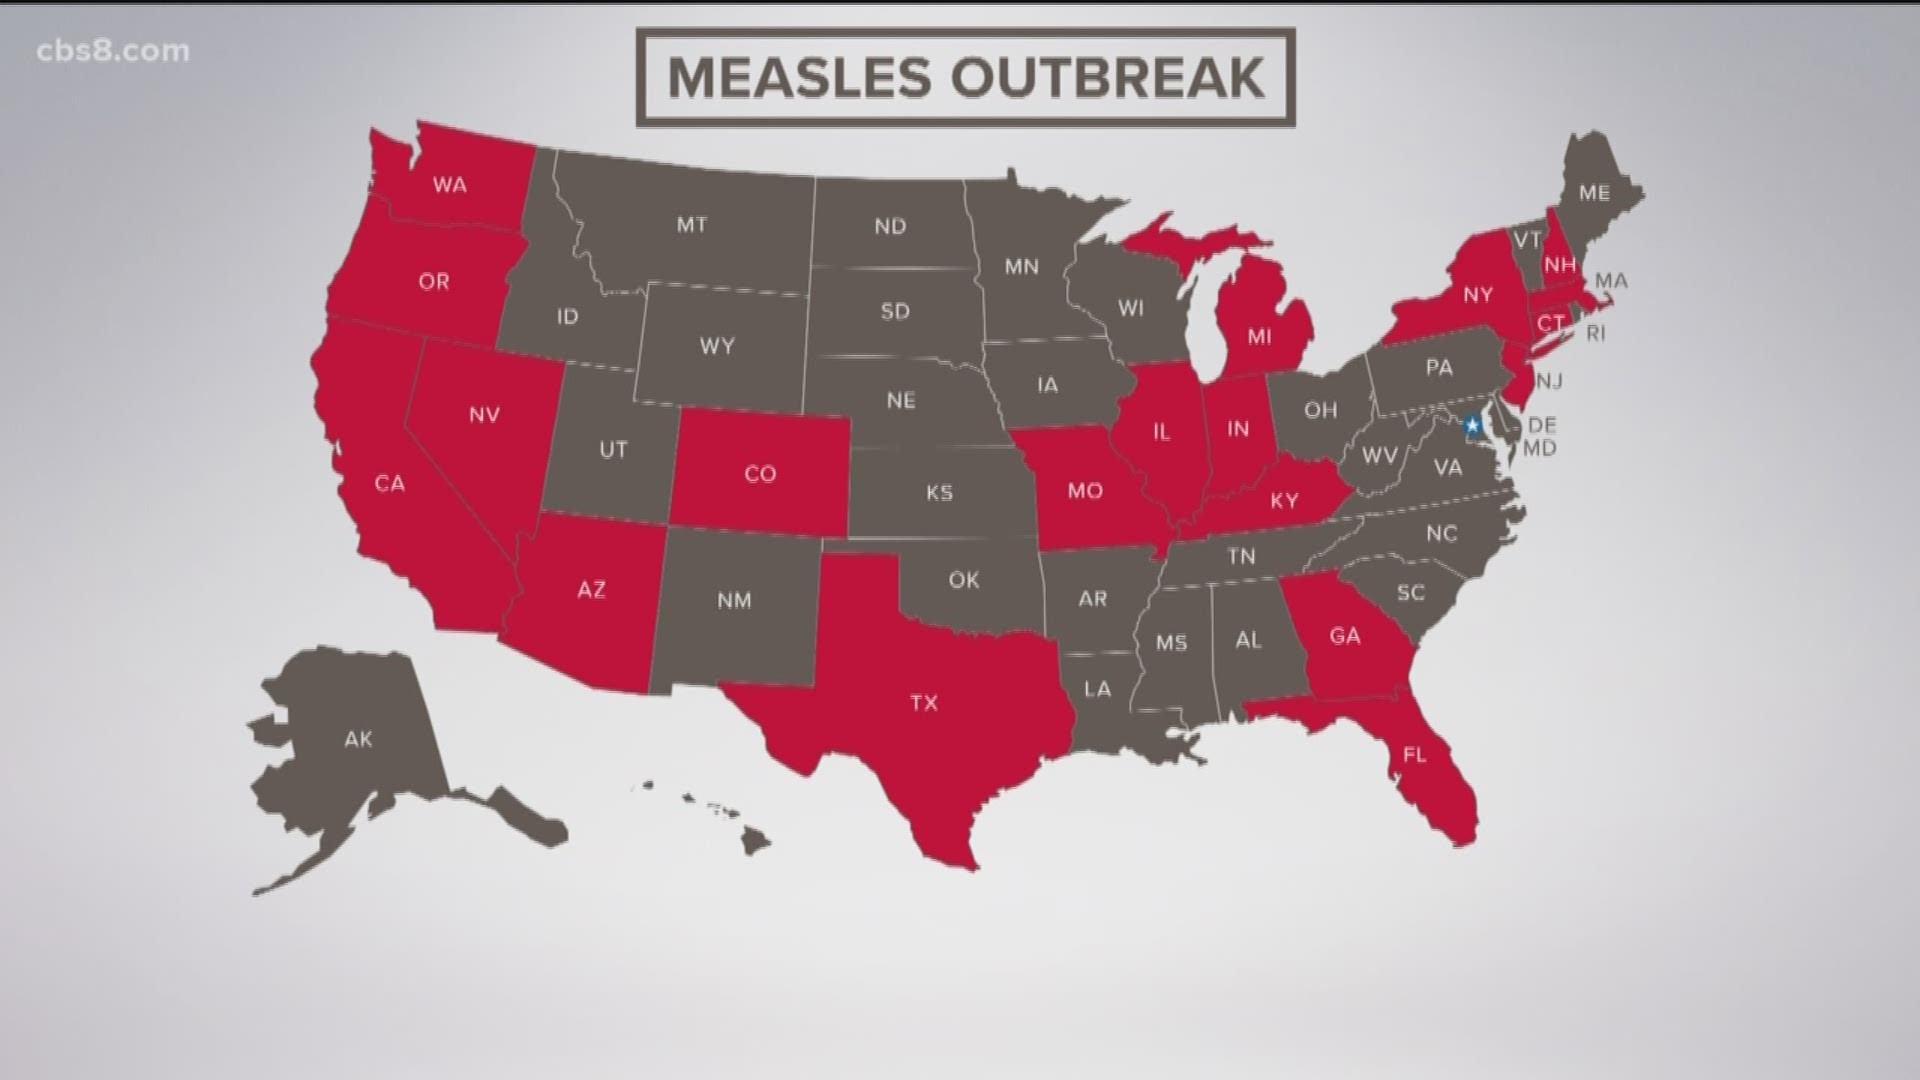 Dr. Angie Neison talks about the signs and symptoms of measles and what you should do if you think you have the disease.